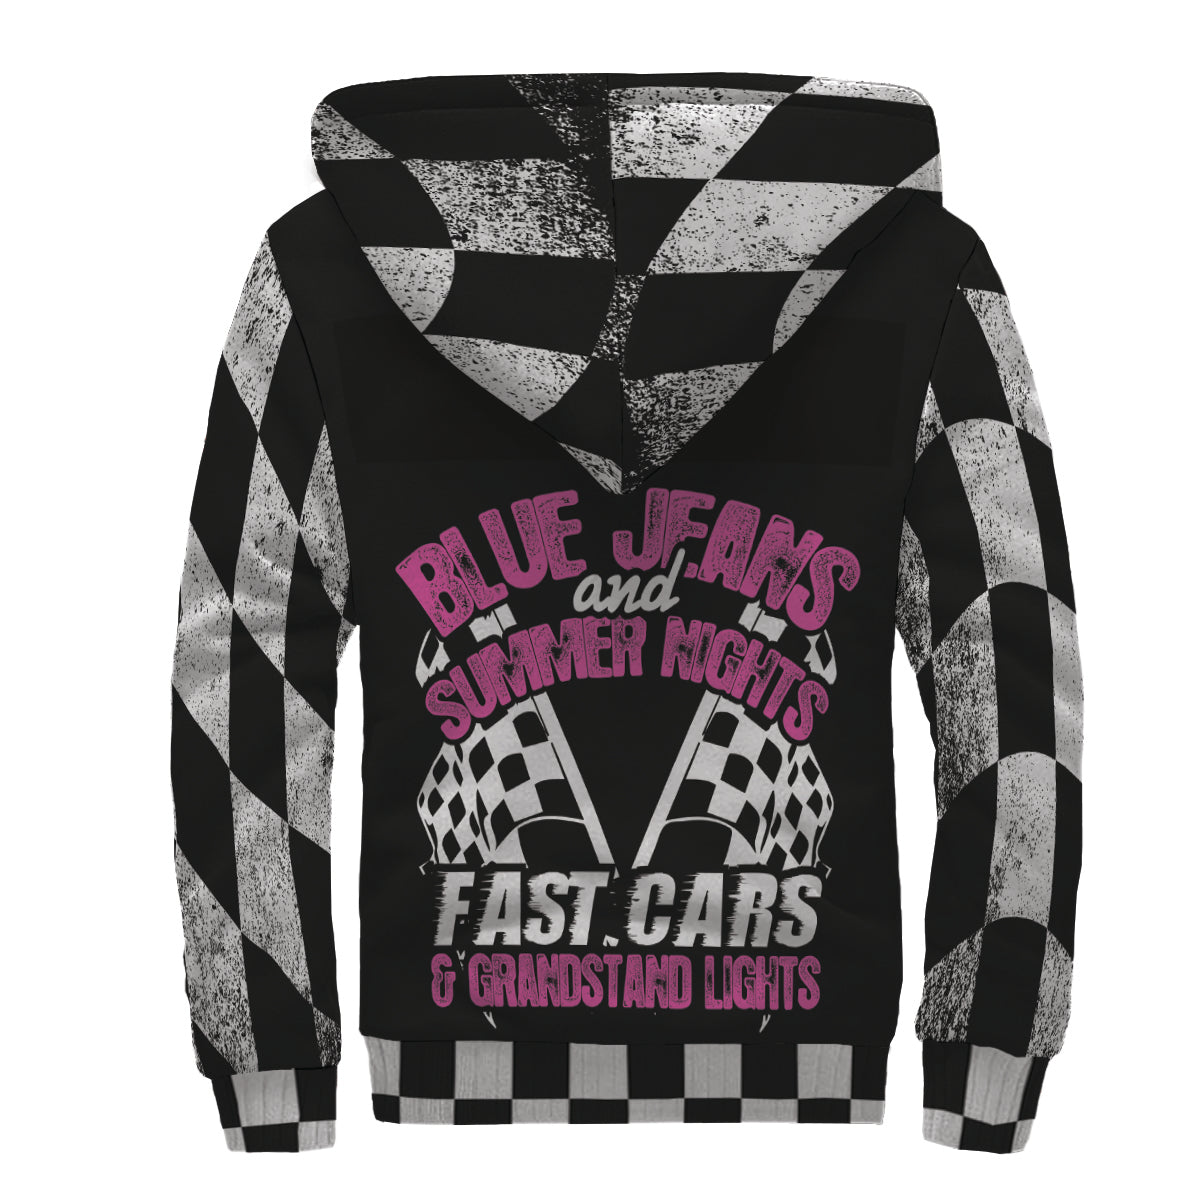 Blue Jeans Summer Nights fast cars and grandstand lights Sherpa Jacket